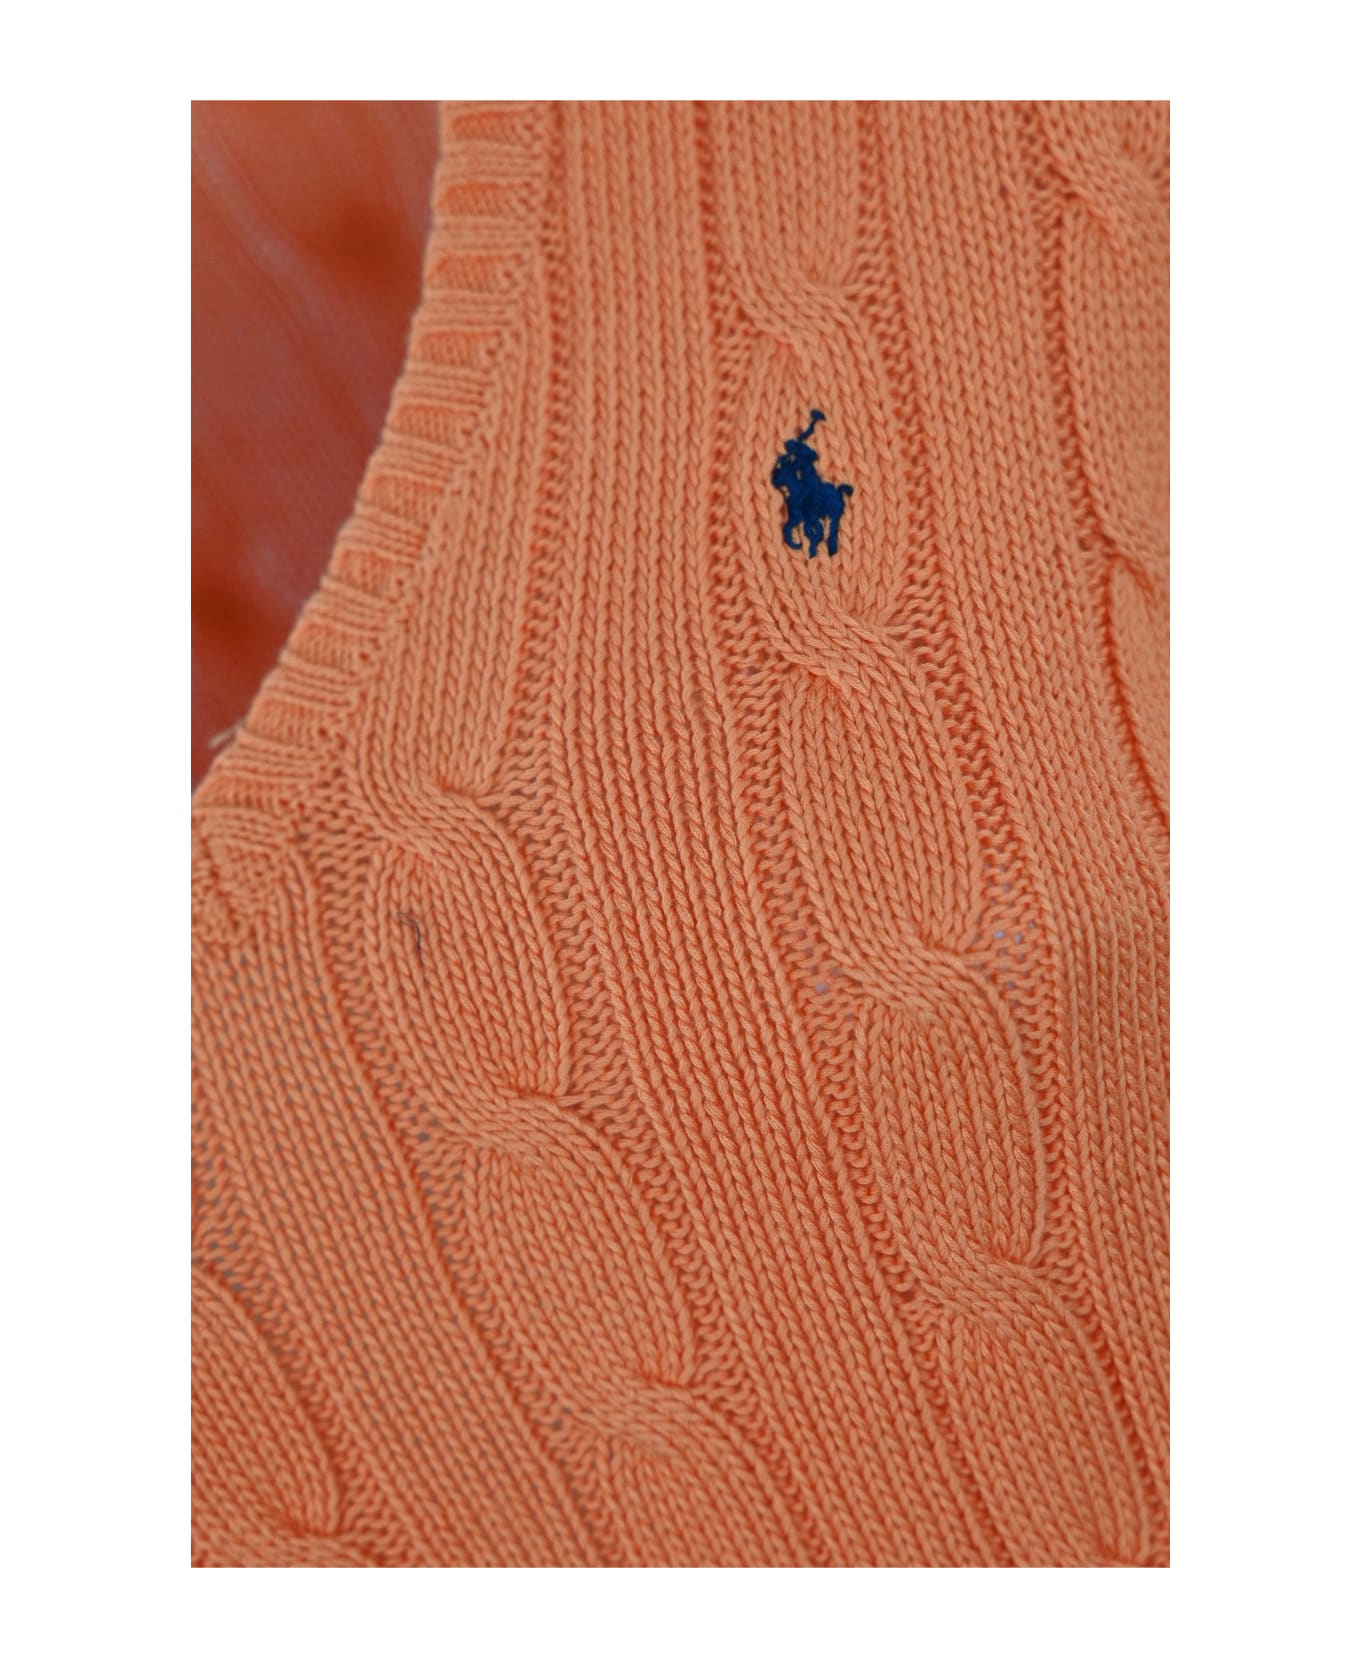 Polo Ralph Lauren Cable Knit Sweater With V-neck - SUNORANGE